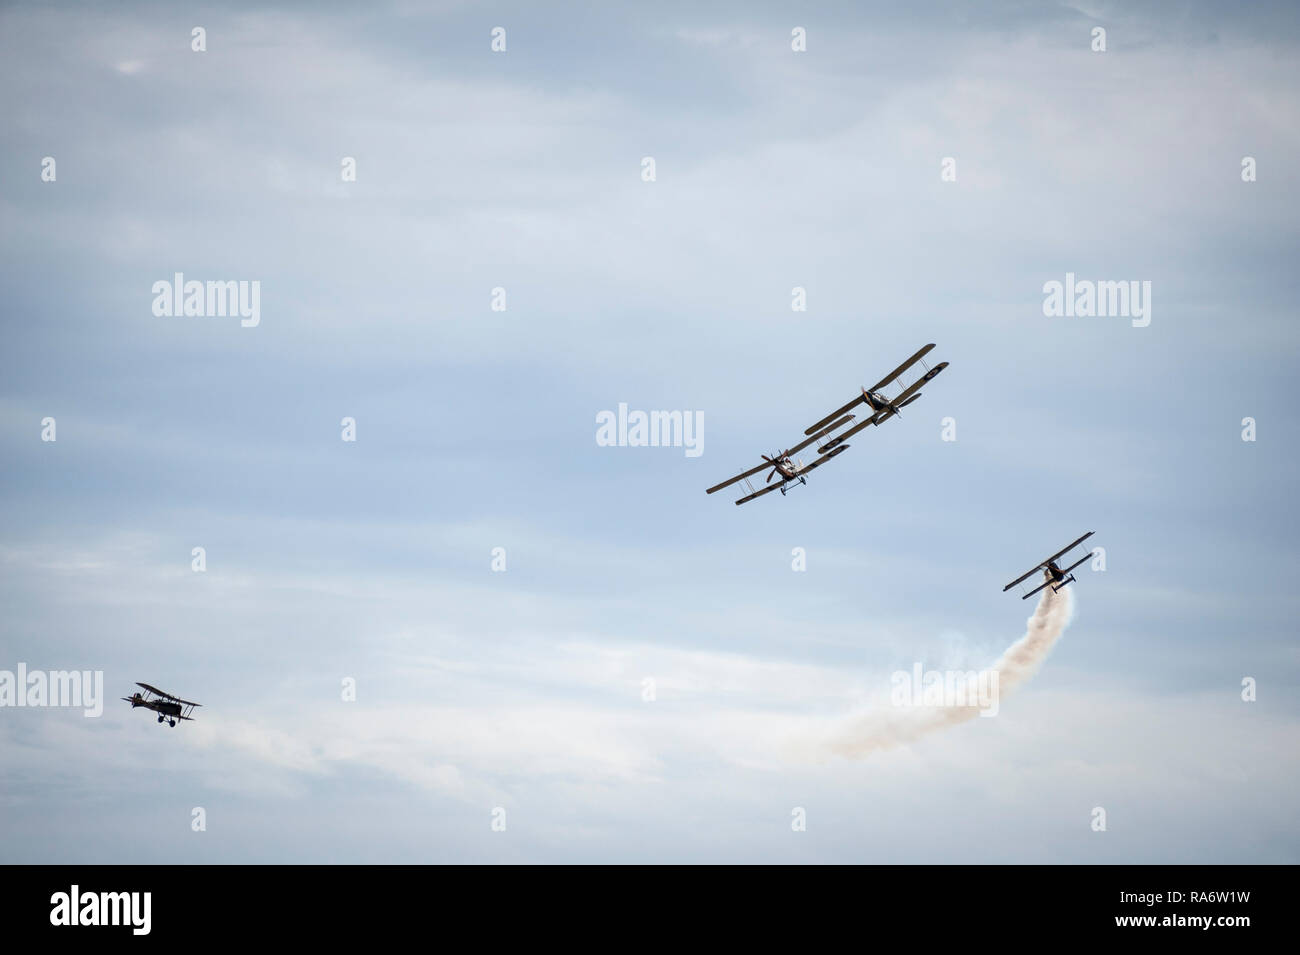 WWI biplanes in a dogfight Stock Photo